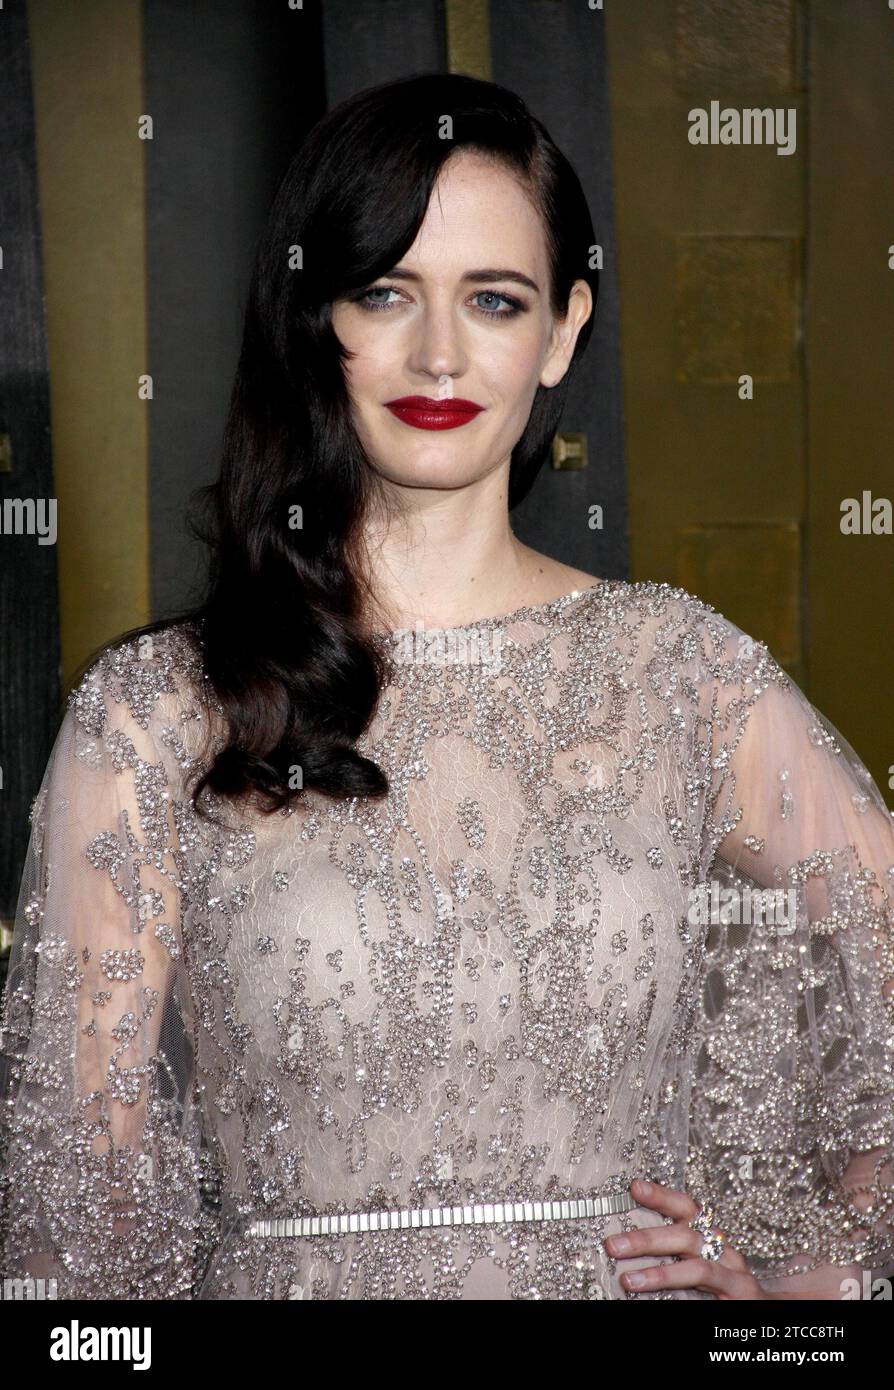 Eva Green at the Los Angeles premiere of '300: Rise Of An Empire' held at the TCL Chinese Theatre in Los Angeles, USA on March 4, 2014 Stock Photo